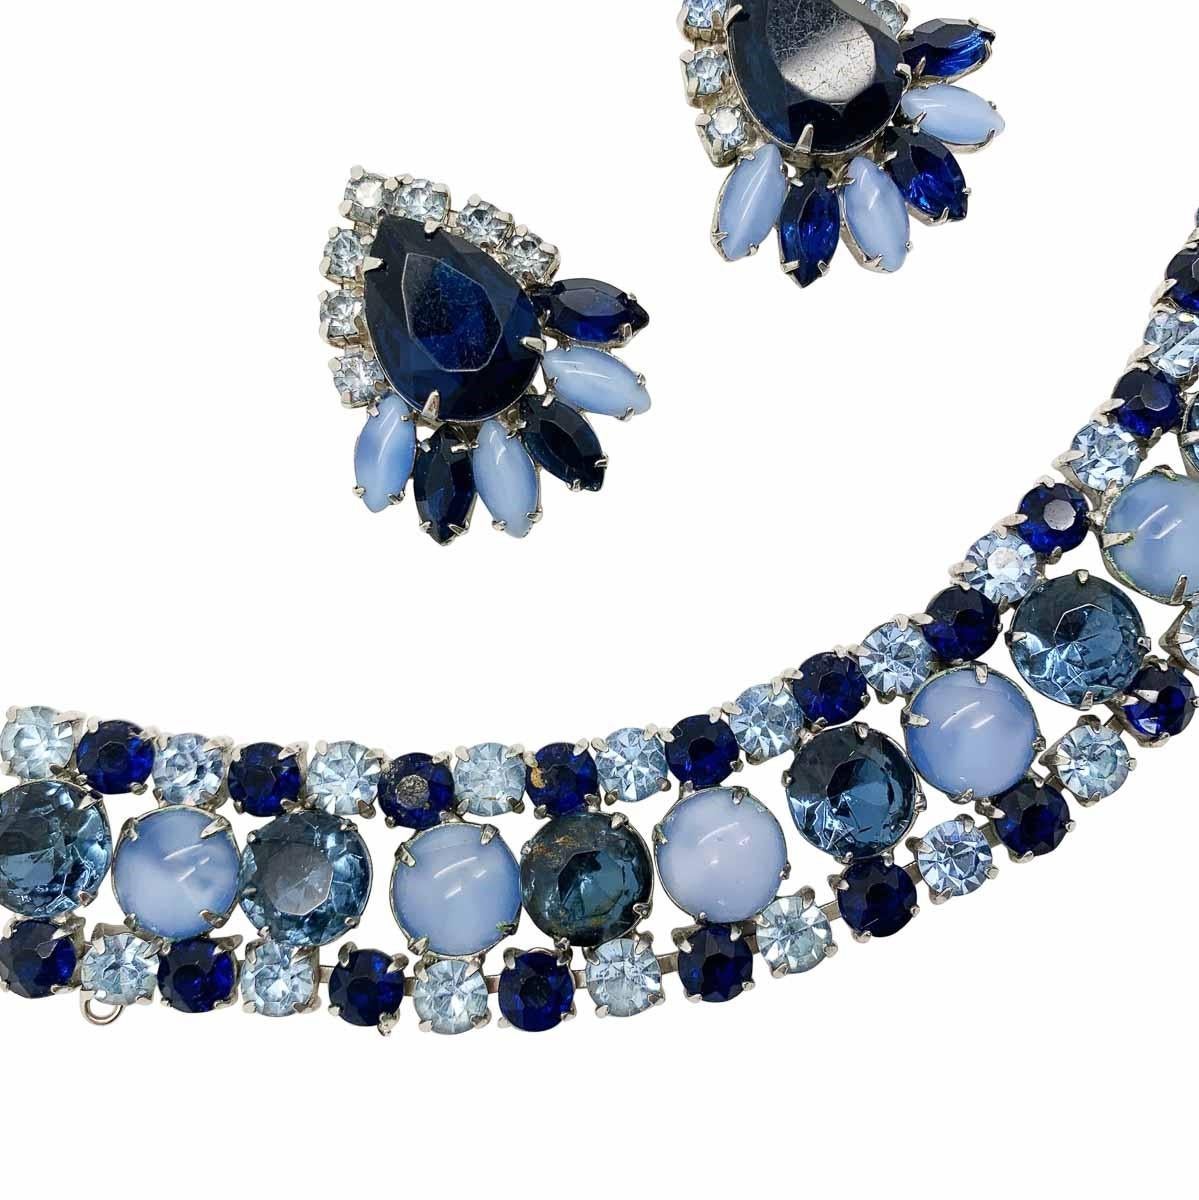 A delightfully feminine moonglow glass bracelet with super stylish matching earrings. Featuring cabochon and marquise cut pale blue moonglow stones with faceted crystal chatons in three shades of blue.

Vintage Condition: Very good without damage or